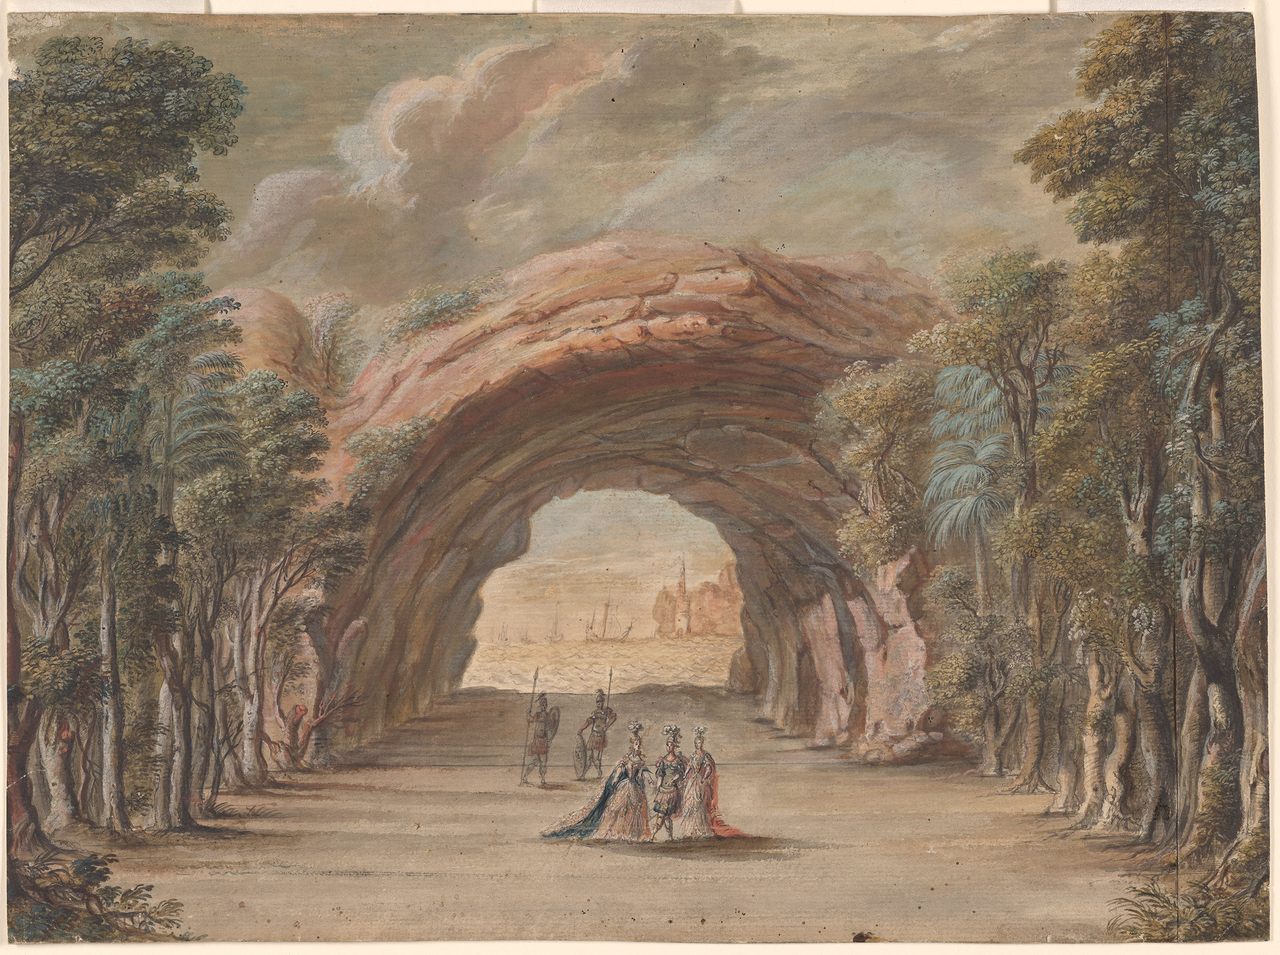 A Torelli set known as “Sea with Ships seen through a Rocky Cavern." Likely originally designed for a failed 1647 production of <em>Orpheus</em>, it was reused in 1650 for <em>Andromeda</em>.